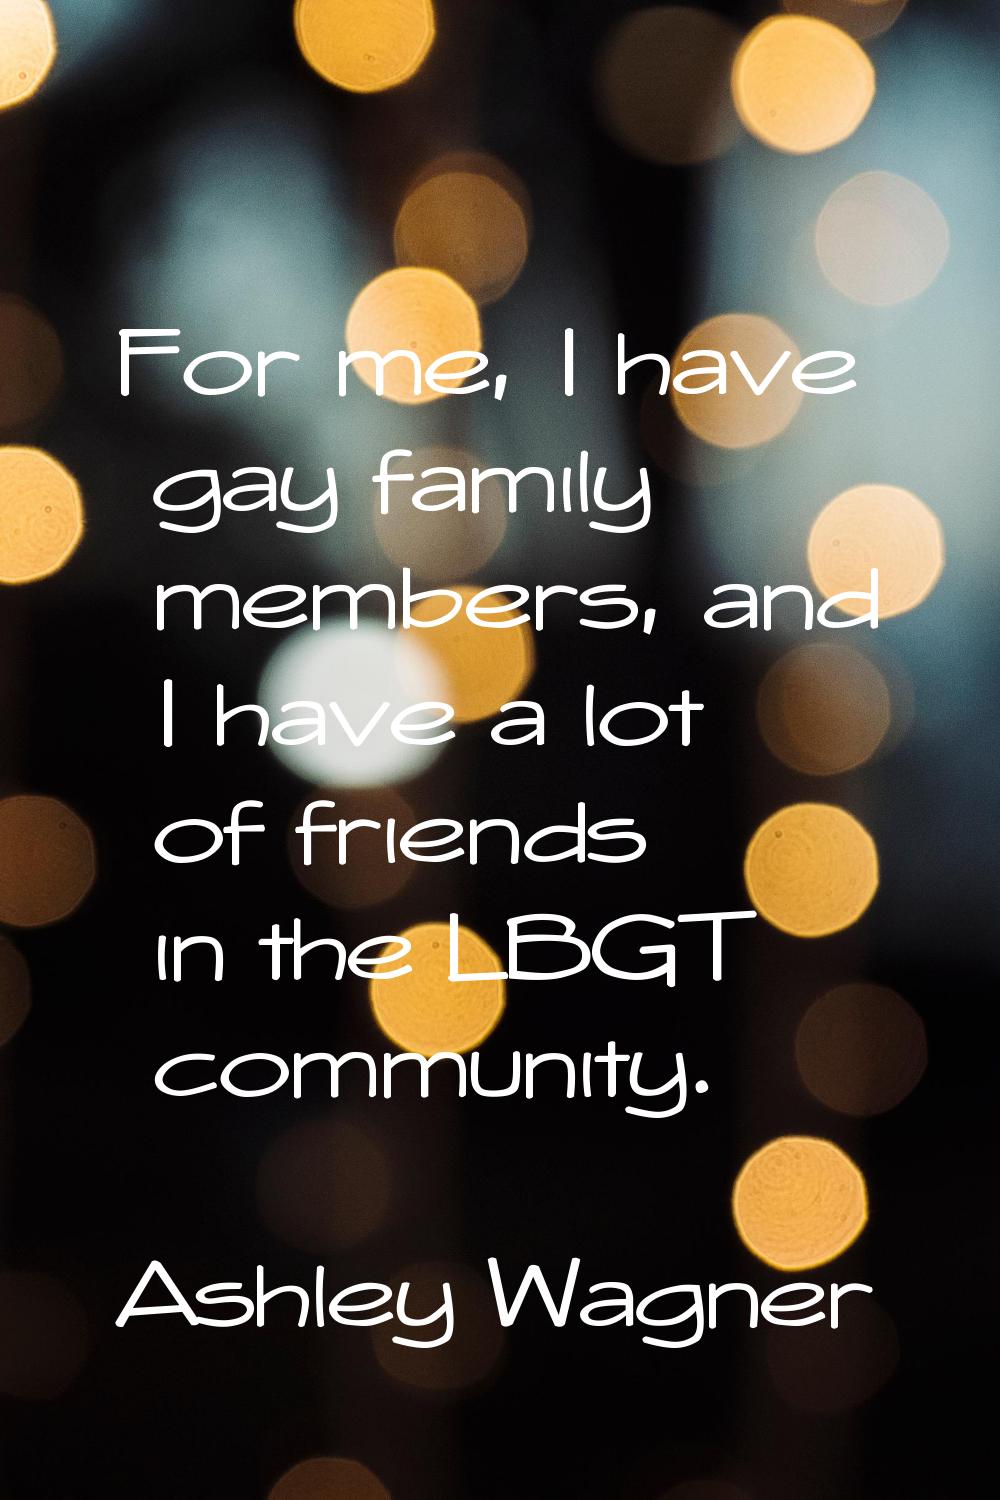 For me, I have gay family members, and I have a lot of friends in the LBGT community.